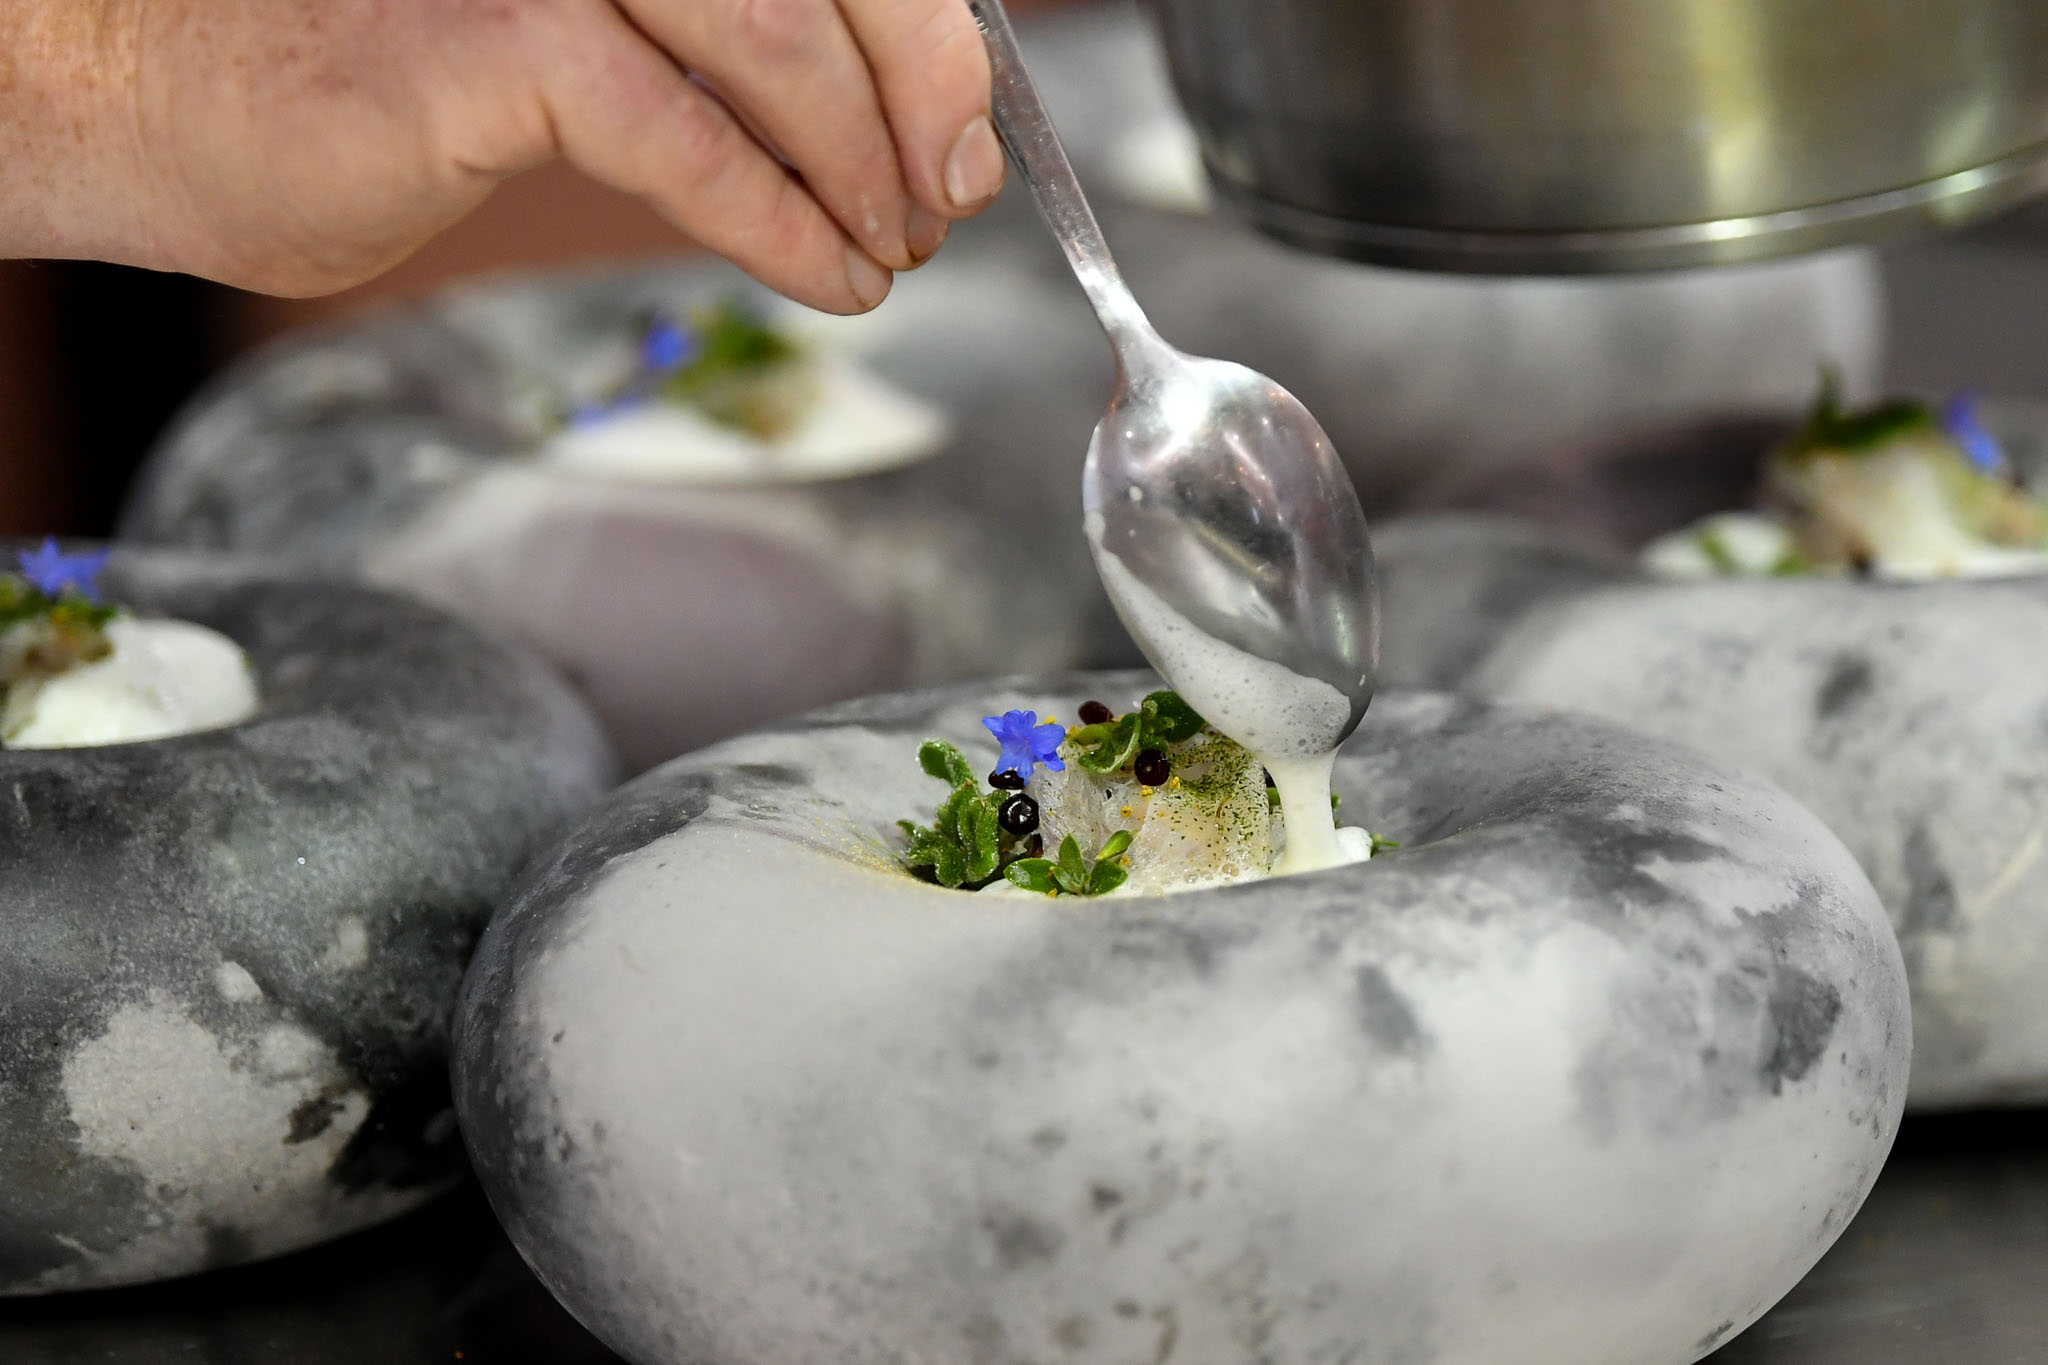 Melbourne, 30 May 2017 - Michael Cole of the Georgie Bass Café & Cookery in Flinders plates up his fish dish at the Australian selection trials of the Bocuse d'Or culinary competition held during the Food Service Australia show at the Royal Exhibition Building in Melbourne, Australia. Photo Sydney Low